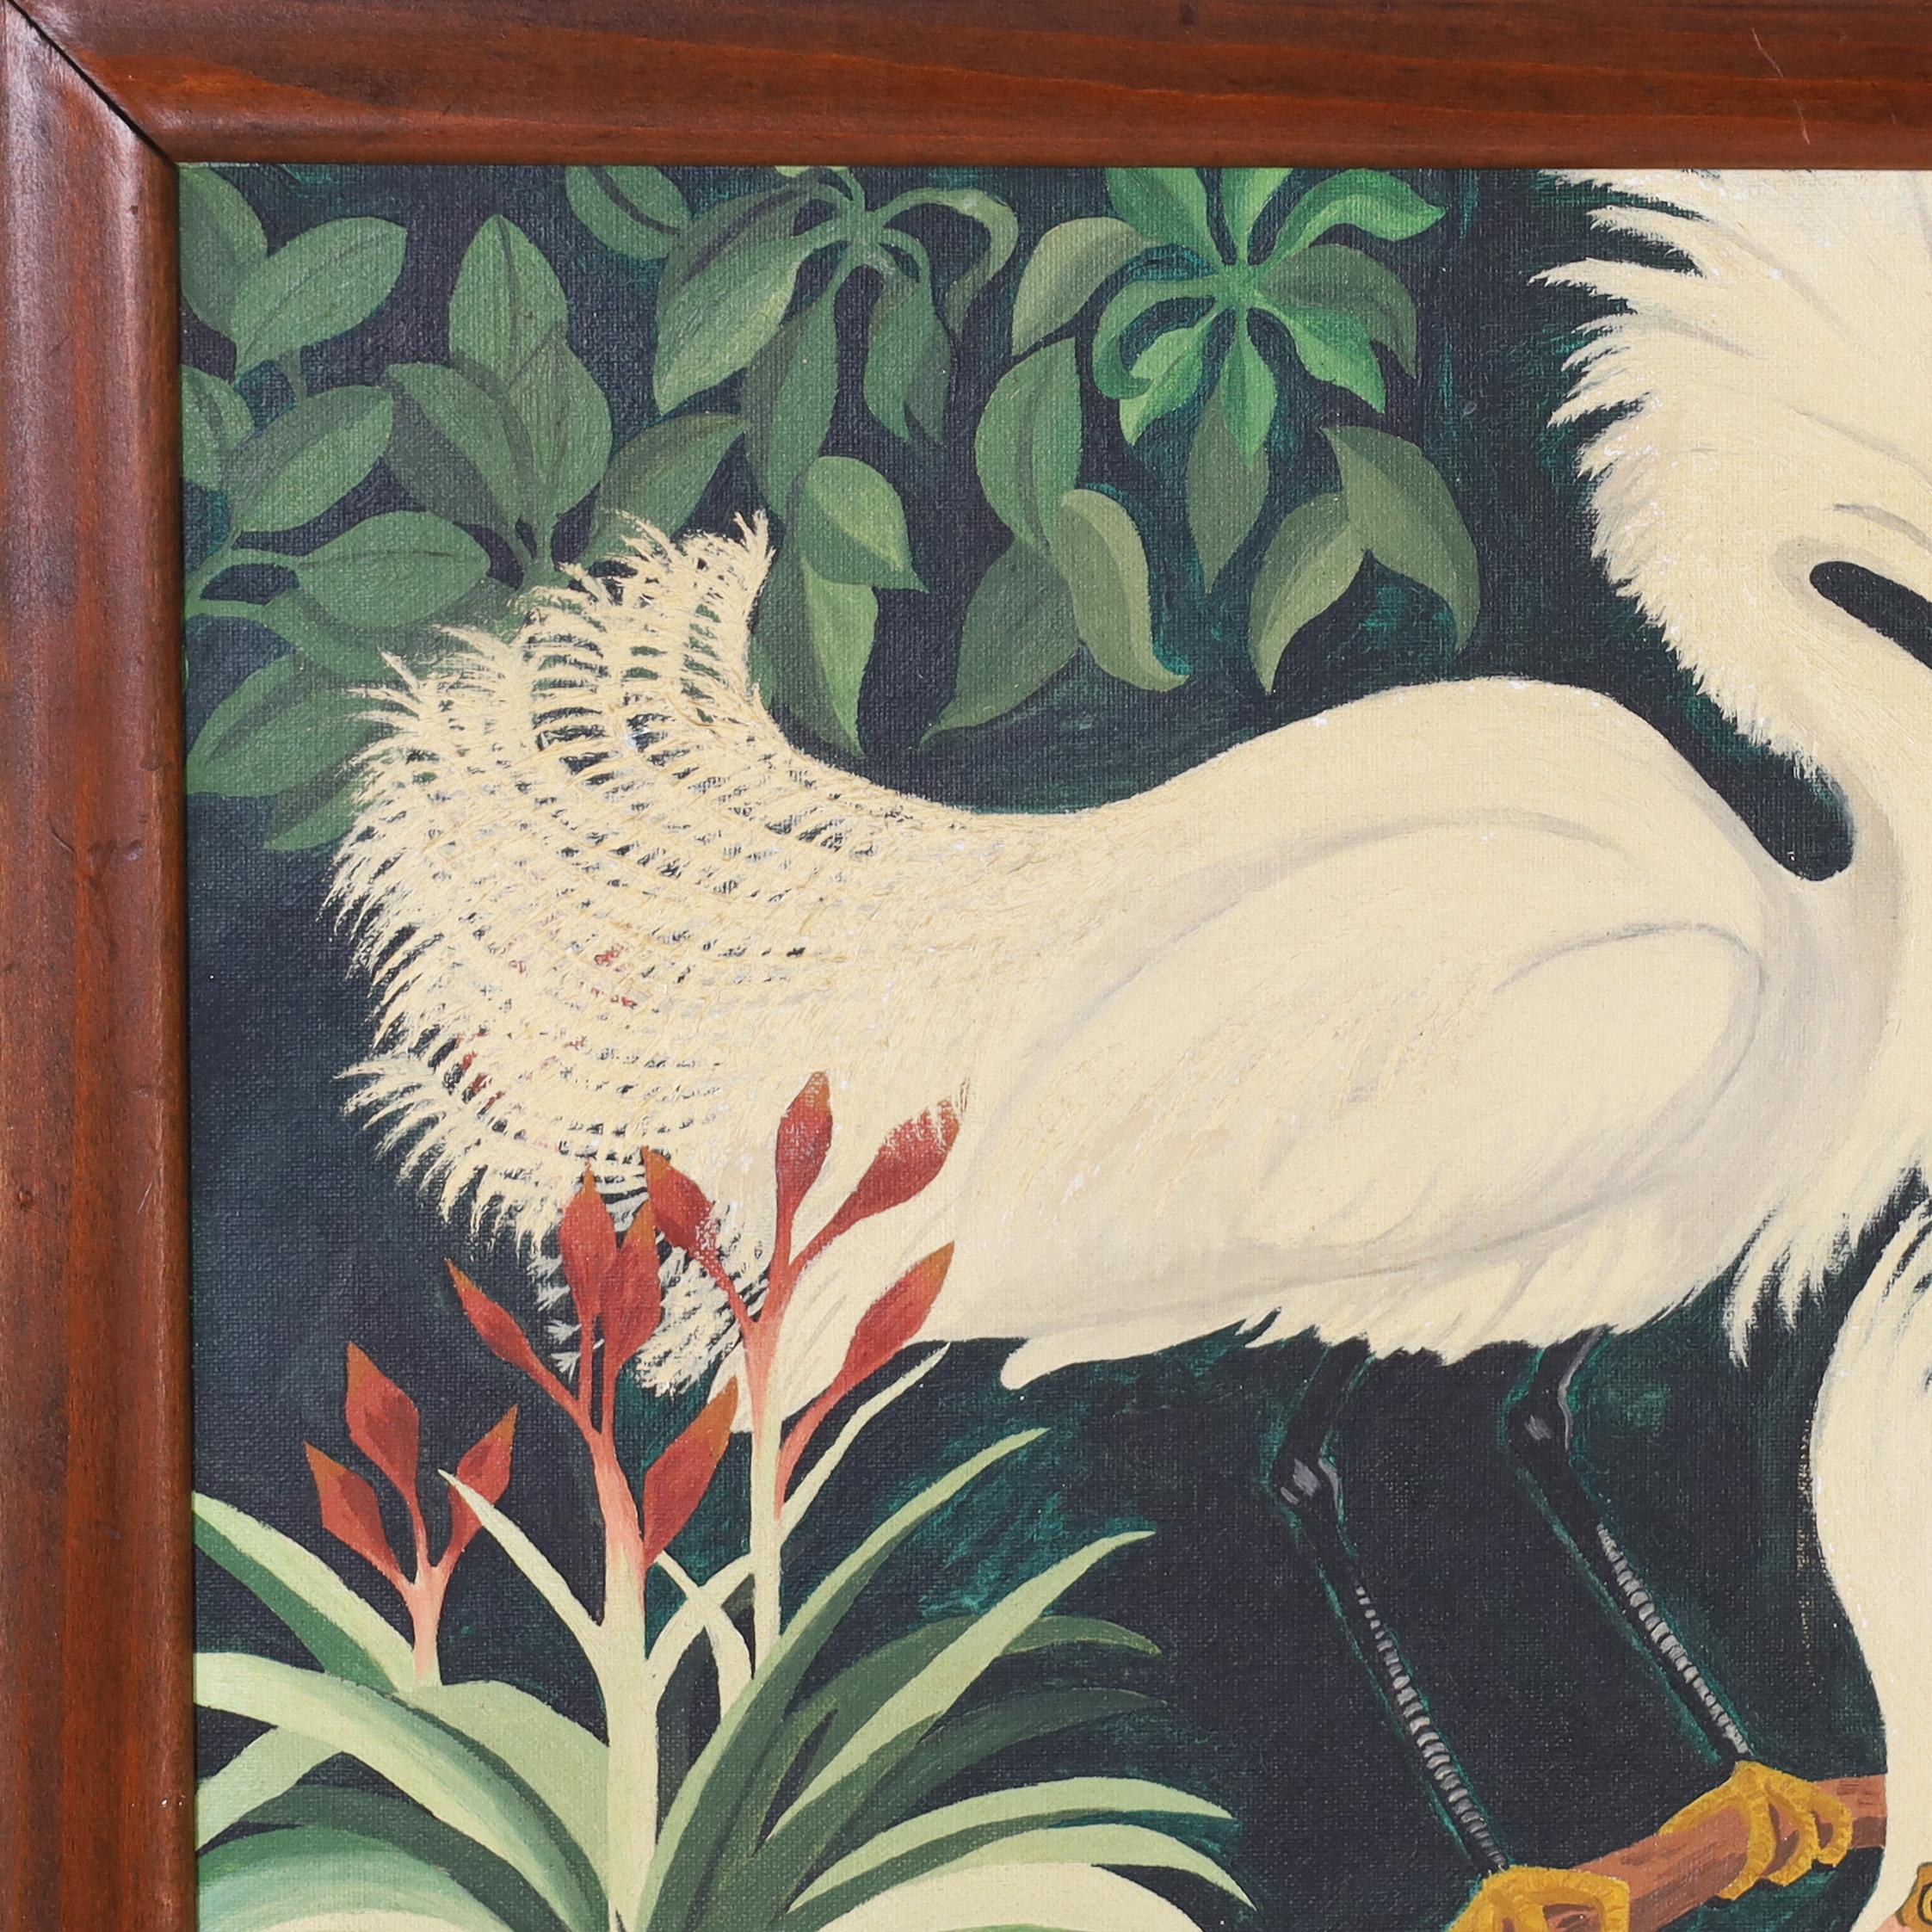 Striking vintage oil painting on board og two snowy egrets in a tropical setting with mangrove trees and flowers. Presented in the original mahogany frame.